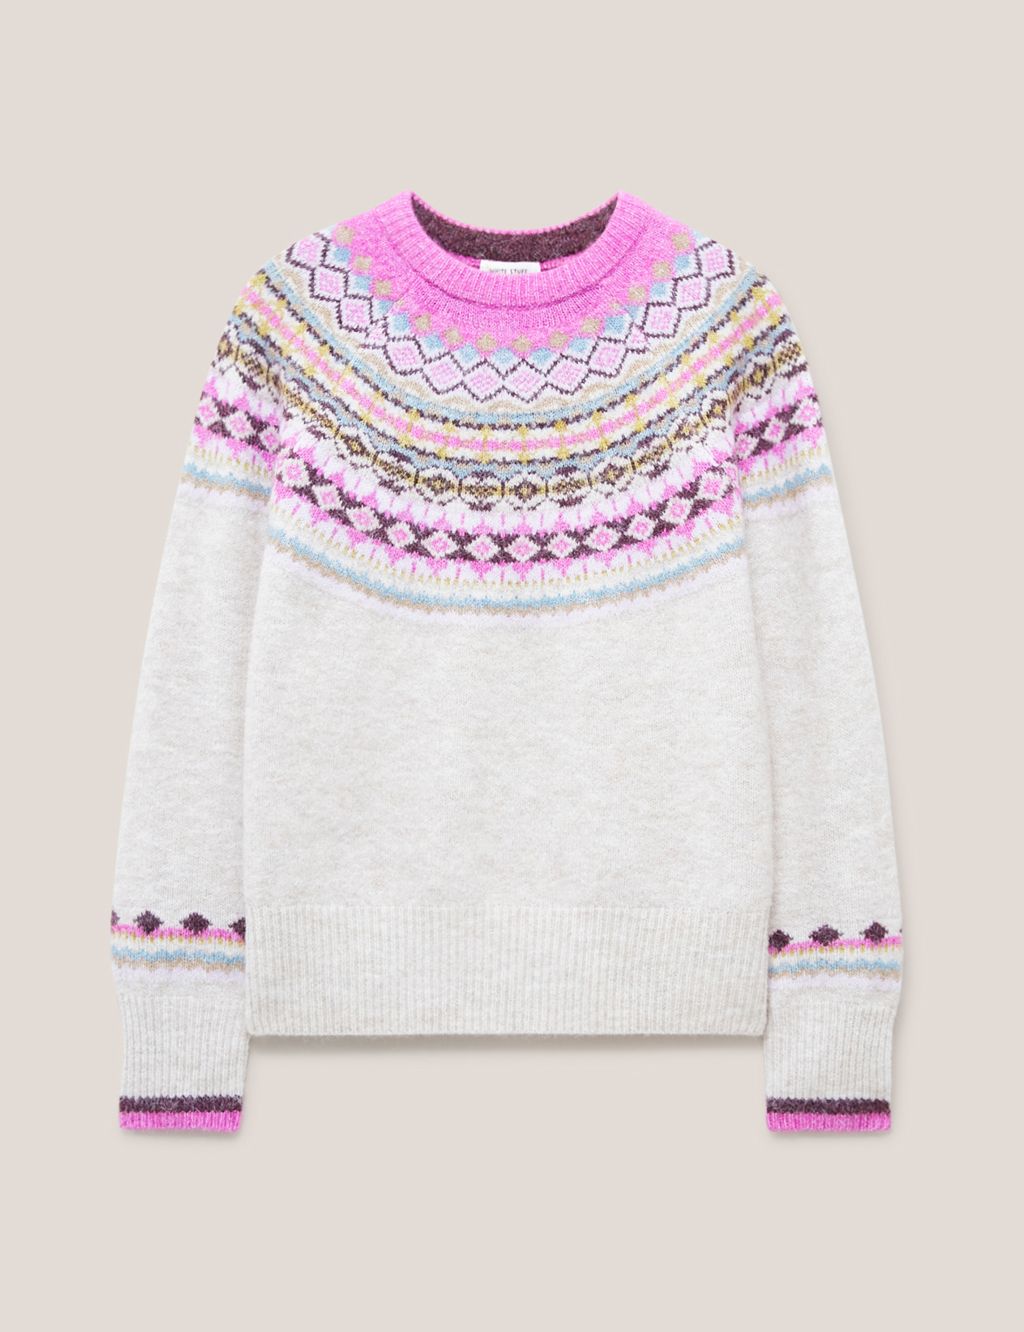 Fair Isle Crew Neck Jumper with Wool image 1